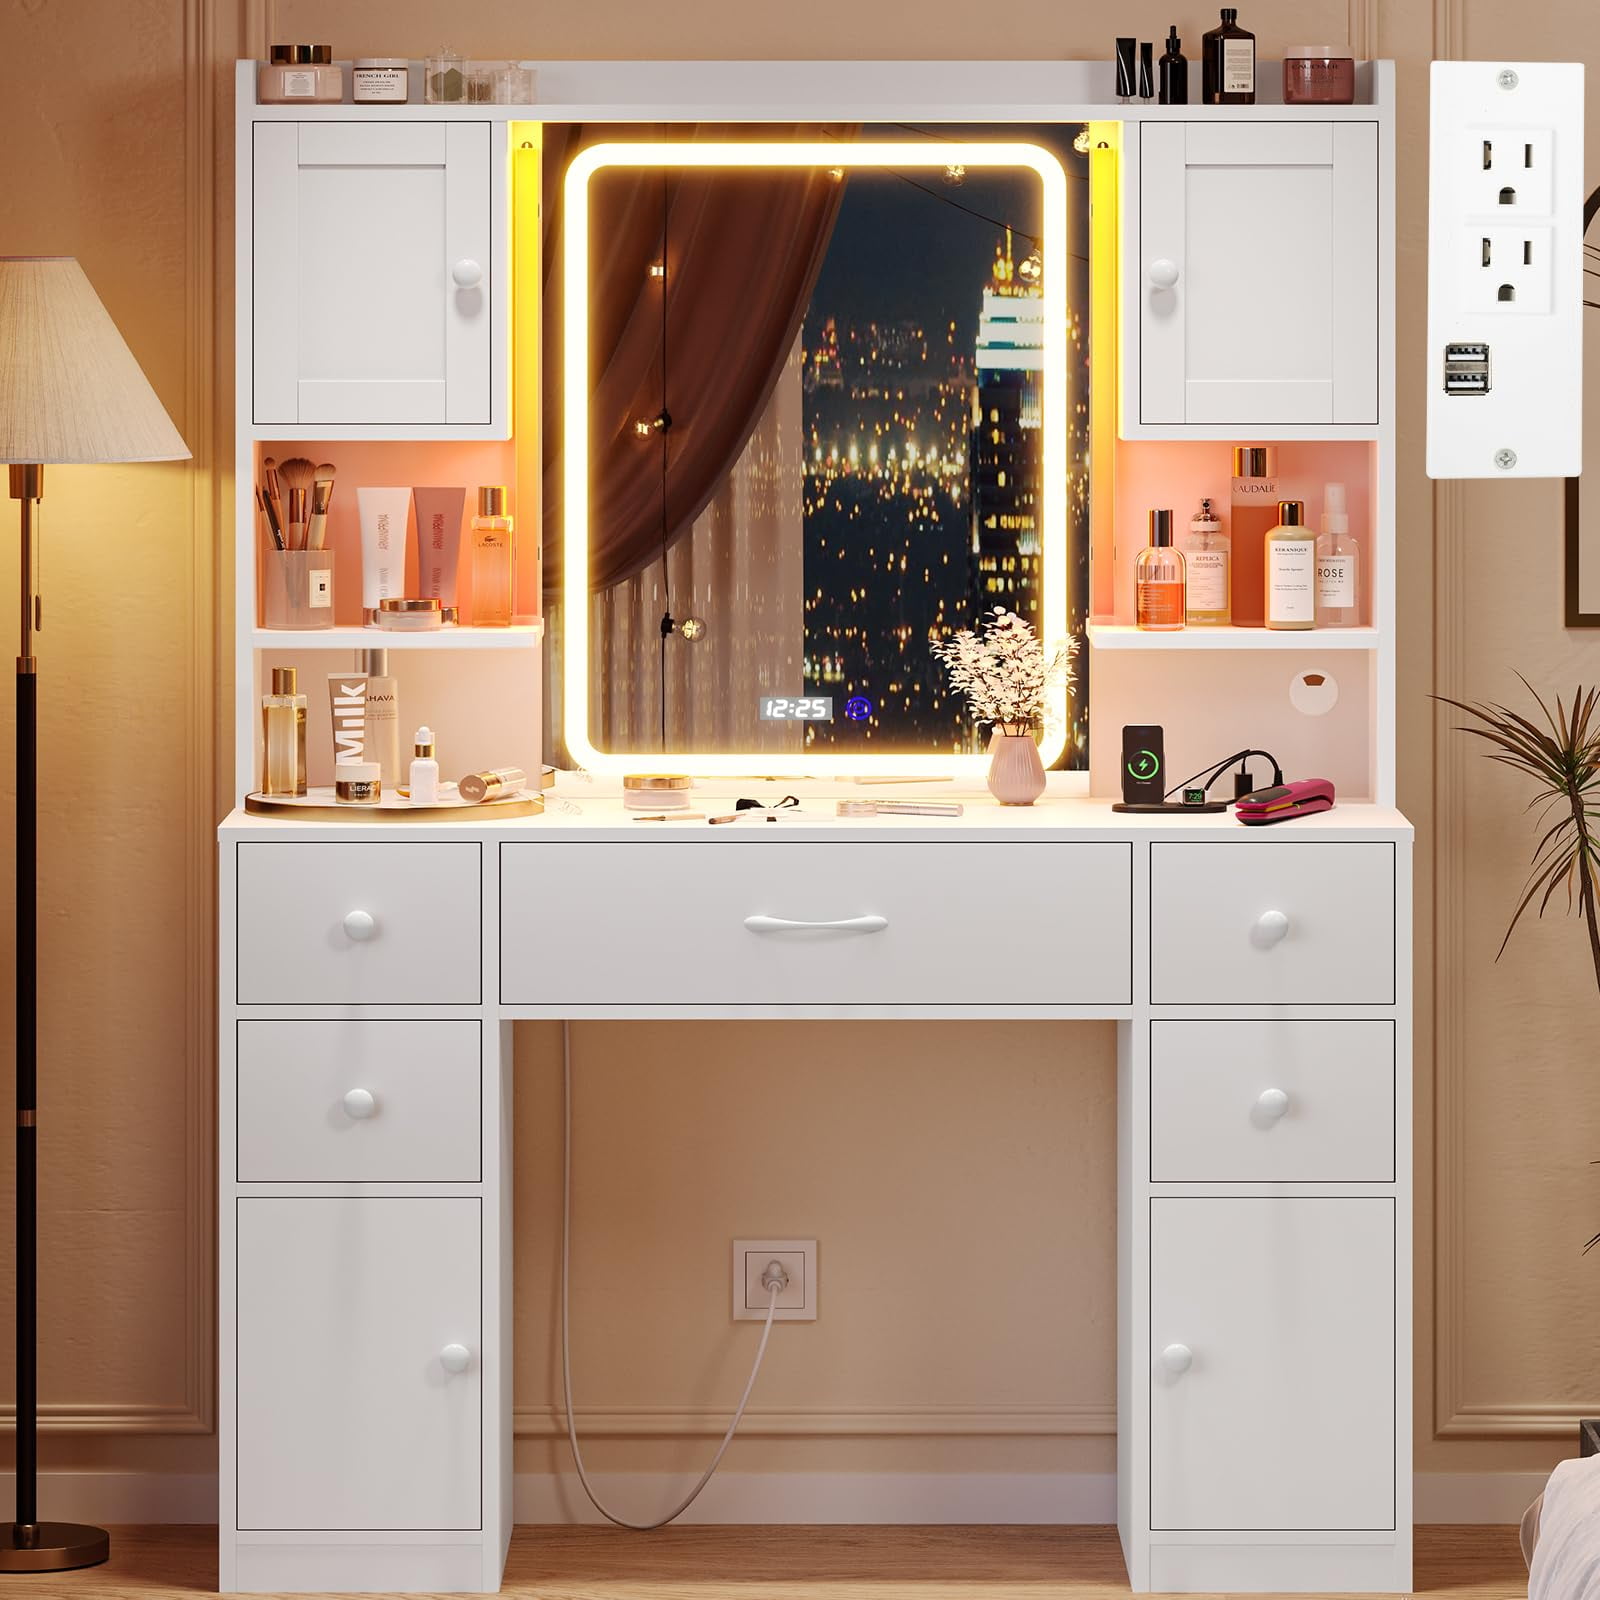 Boahaus Black White with Alana Ball Vanity Lights, Drawers, and 5 Knobs, Mirror Crystal Desk